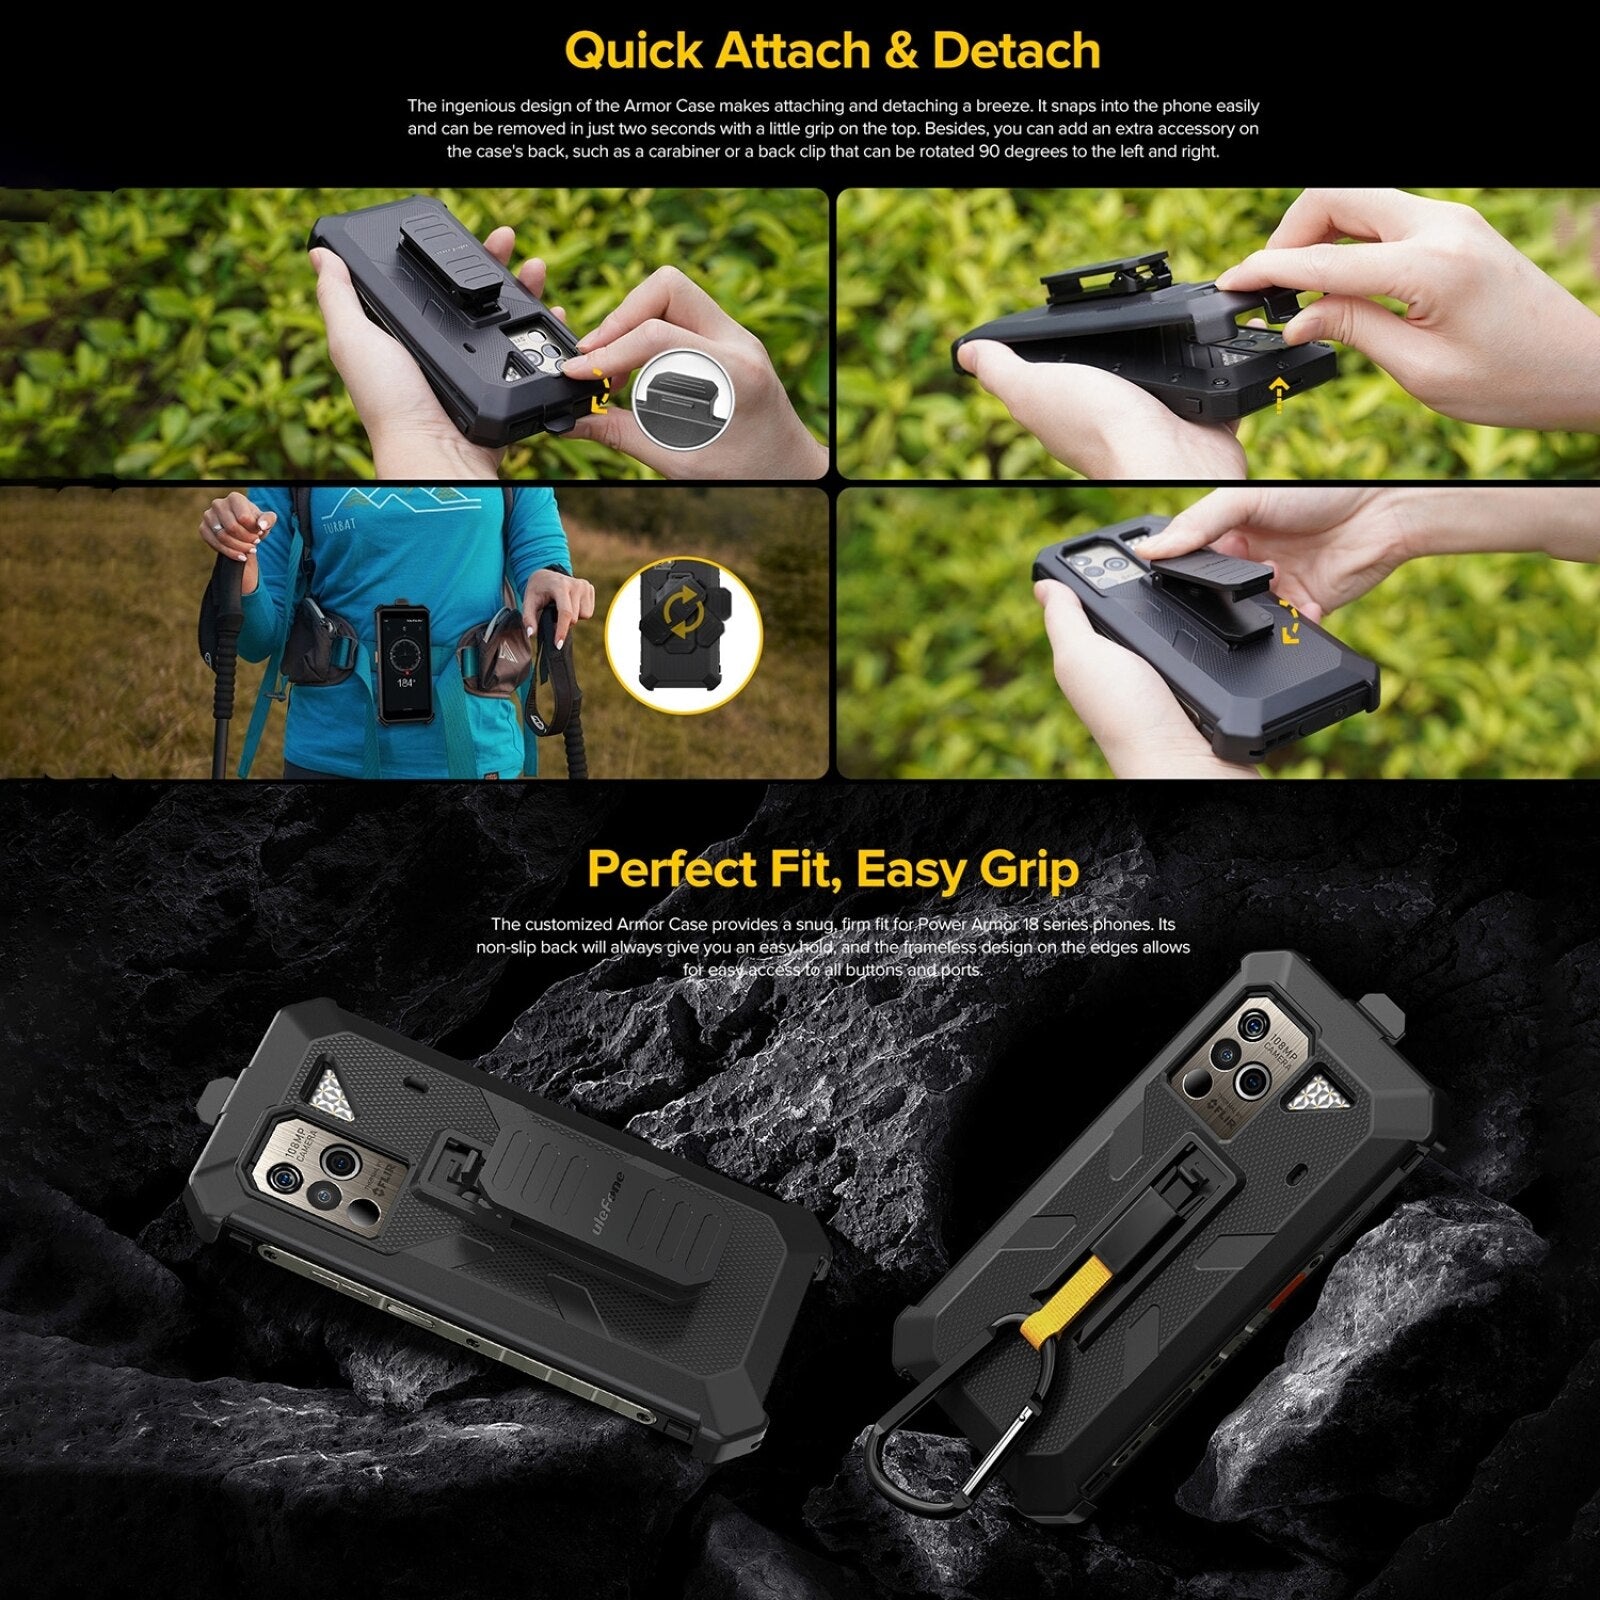 For Ulefone Power Armor 18T Ulefone Back Clip Phone Case with Carabiner For Ulefone Armor 18T / 18 / 19 / 19T